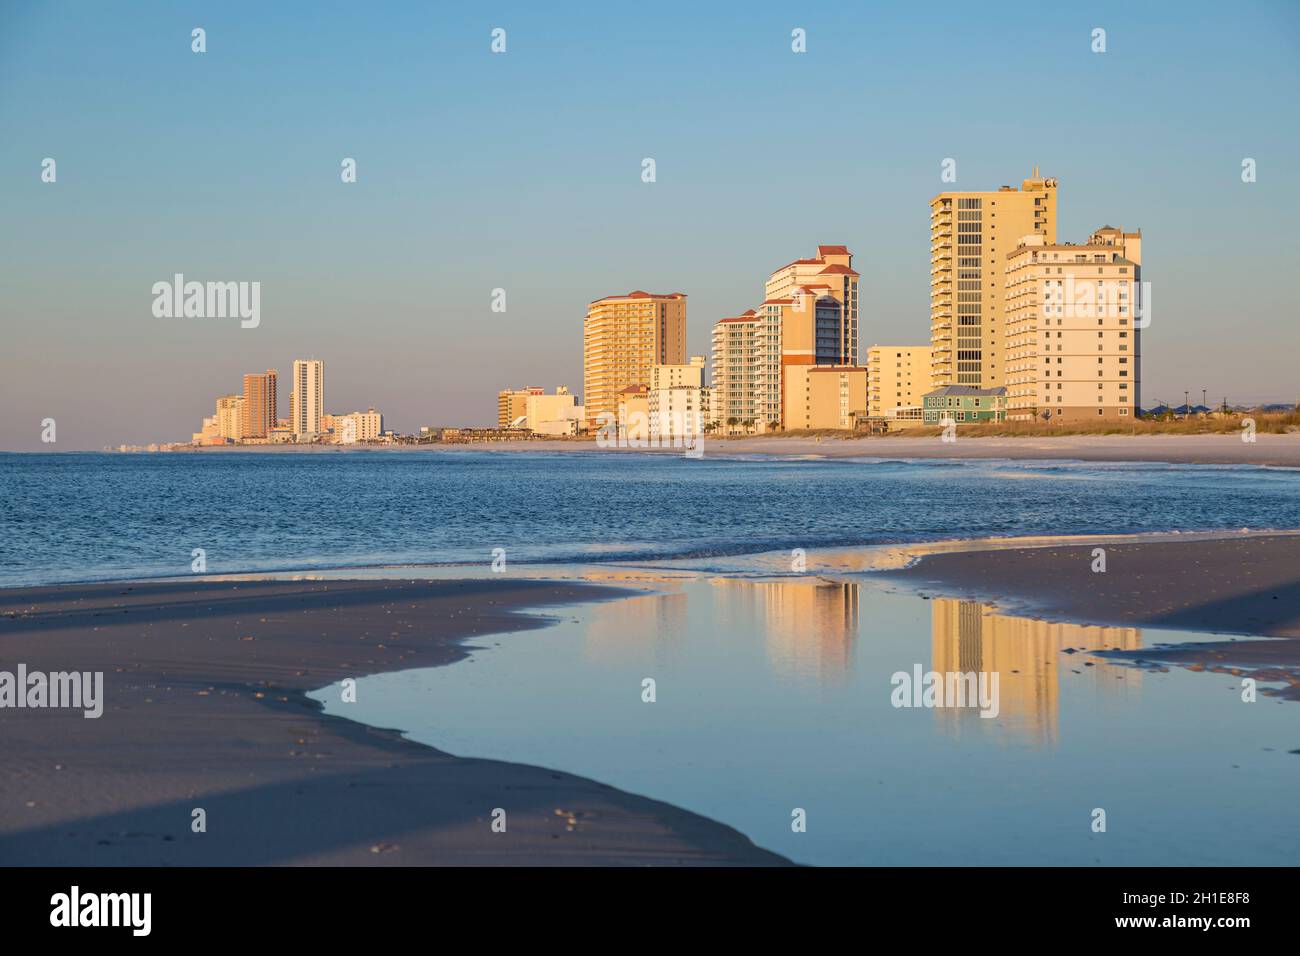 Hotels and condominiums along the Gulf Coast in Gulf Shores, Alabama Stock Photo